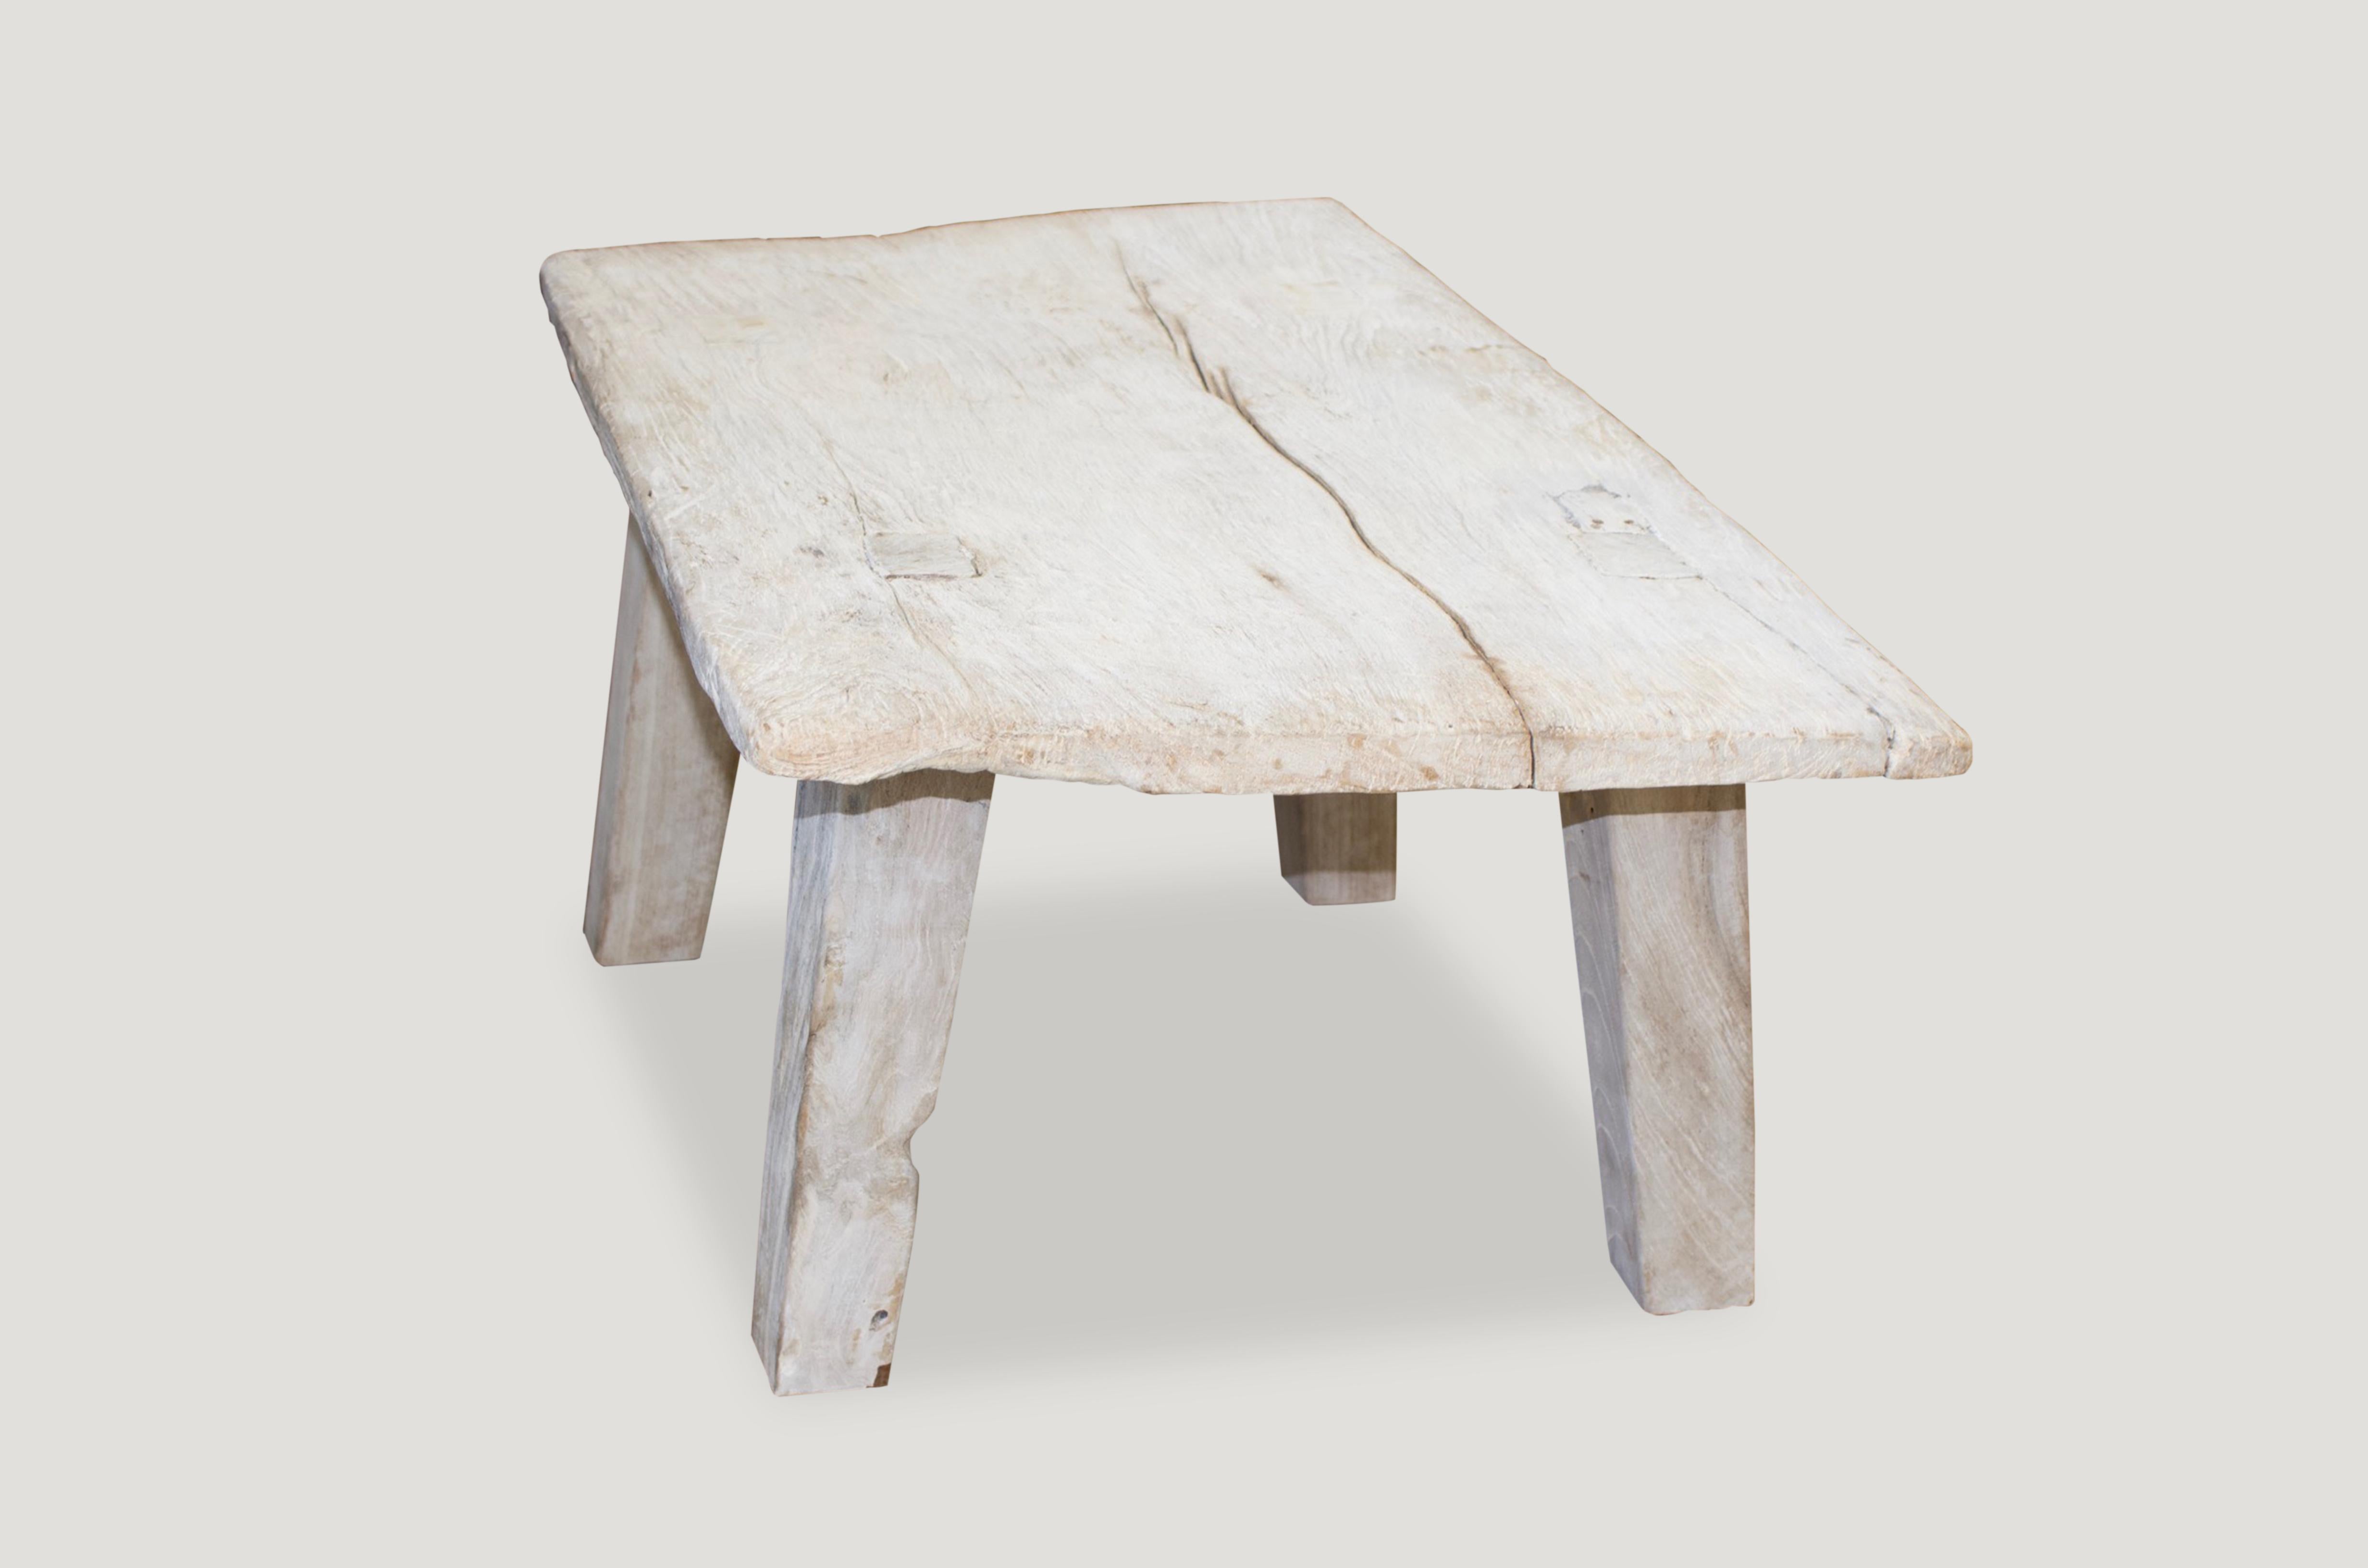 Reclaimed single teak wabi sabi coffee table, side table or bench. We added a light white wash finish. Perfect for inside or outside living.

The St. Barts Collection features an exciting new line of organic white wash and natural weathered teak